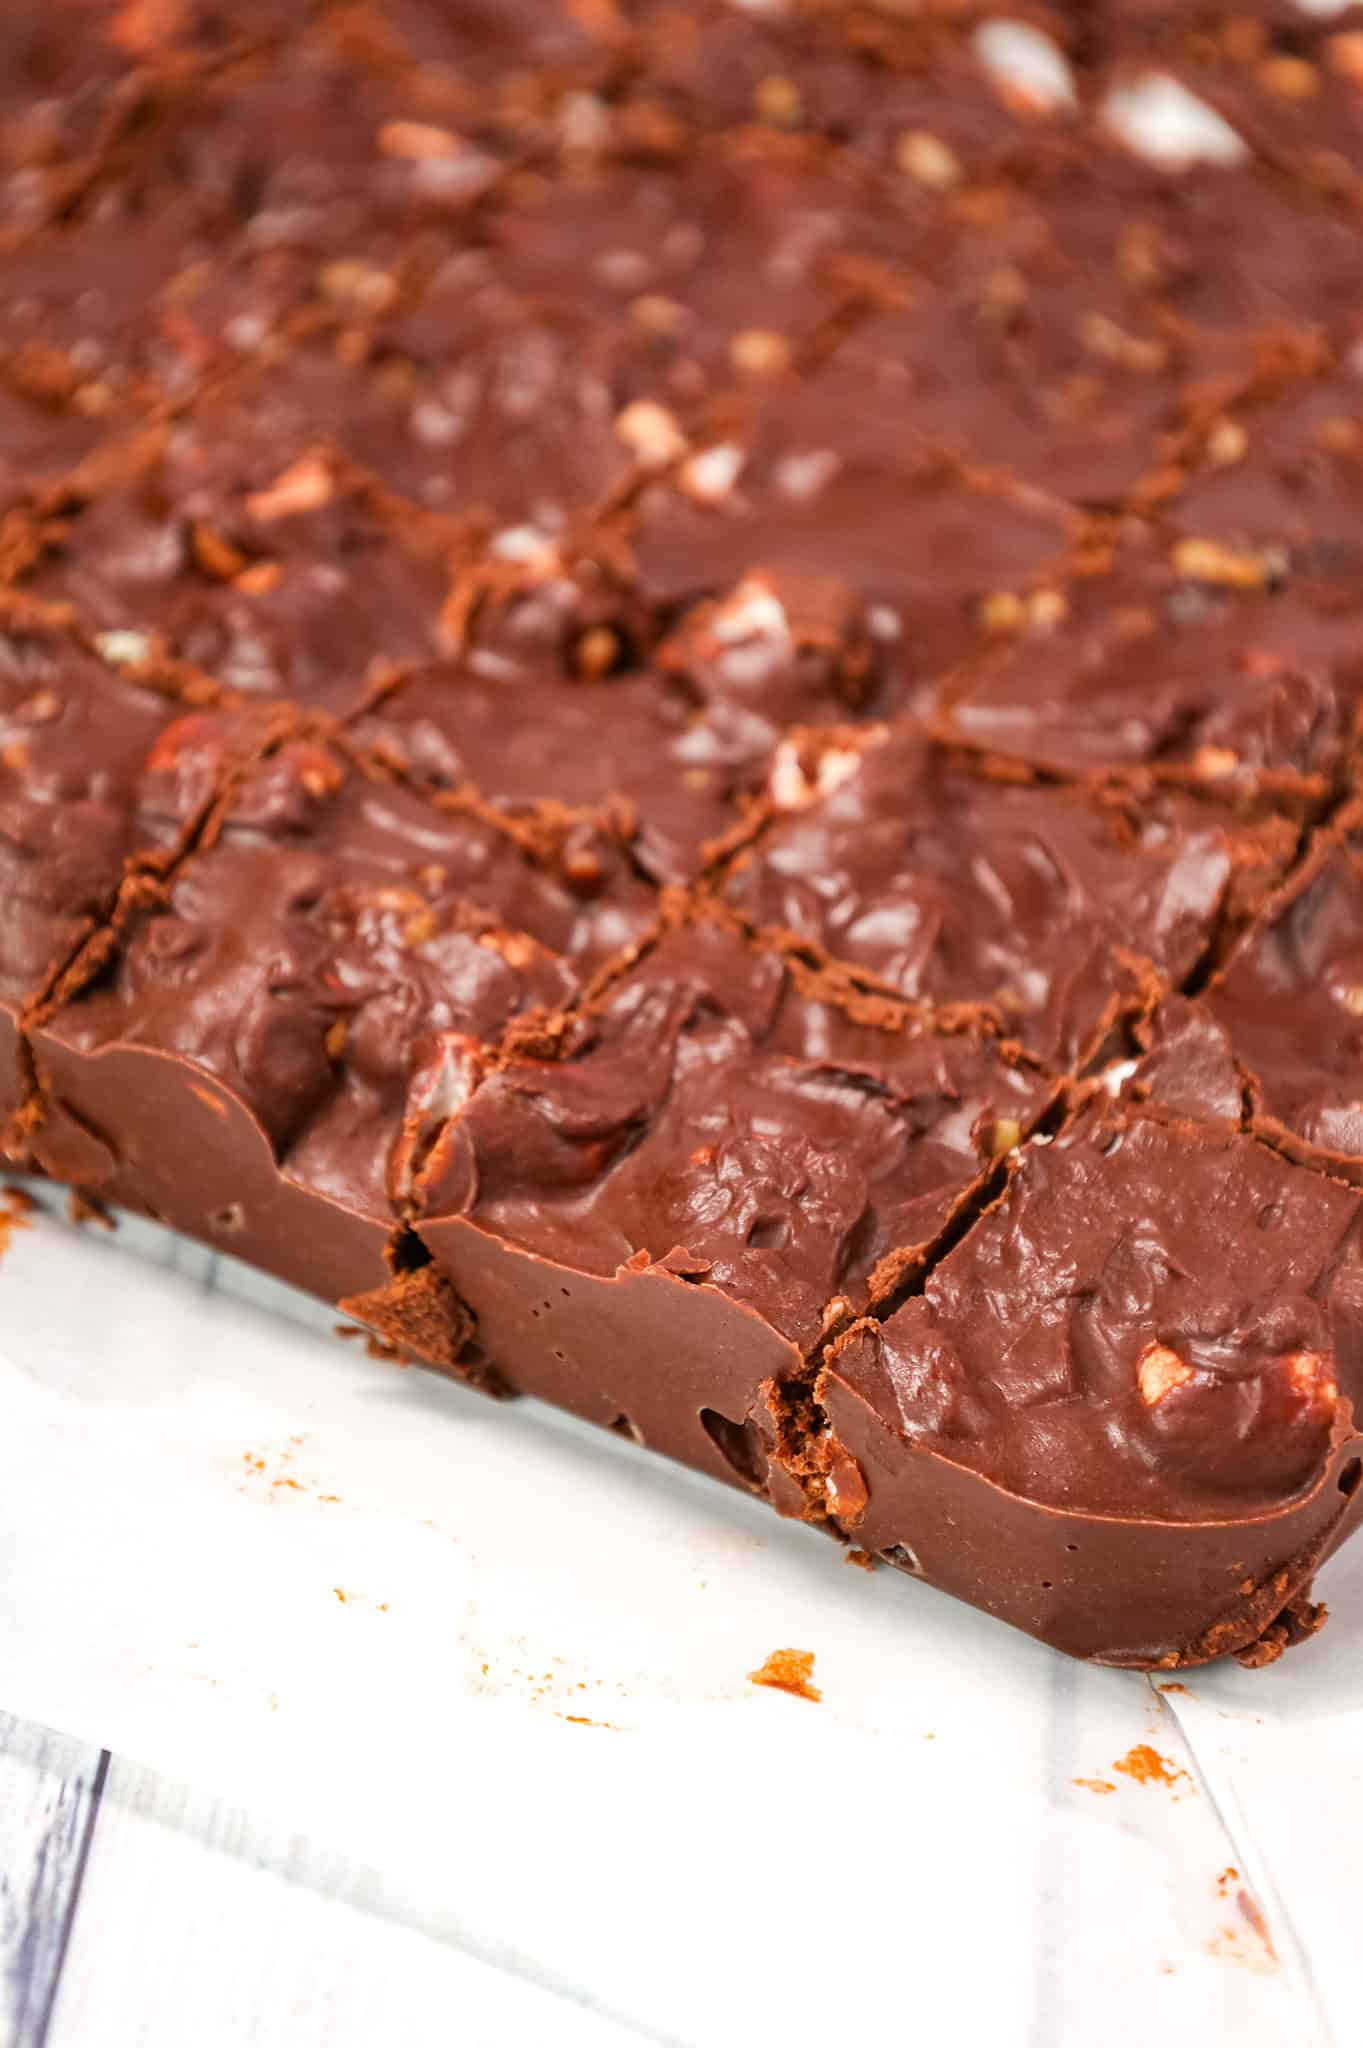 Rocky Road Fudge is an easy microwave fudge recipe loaded with semi sweet chocolate chips, chocolate frosting, chopped walnuts and mini marshmallows.